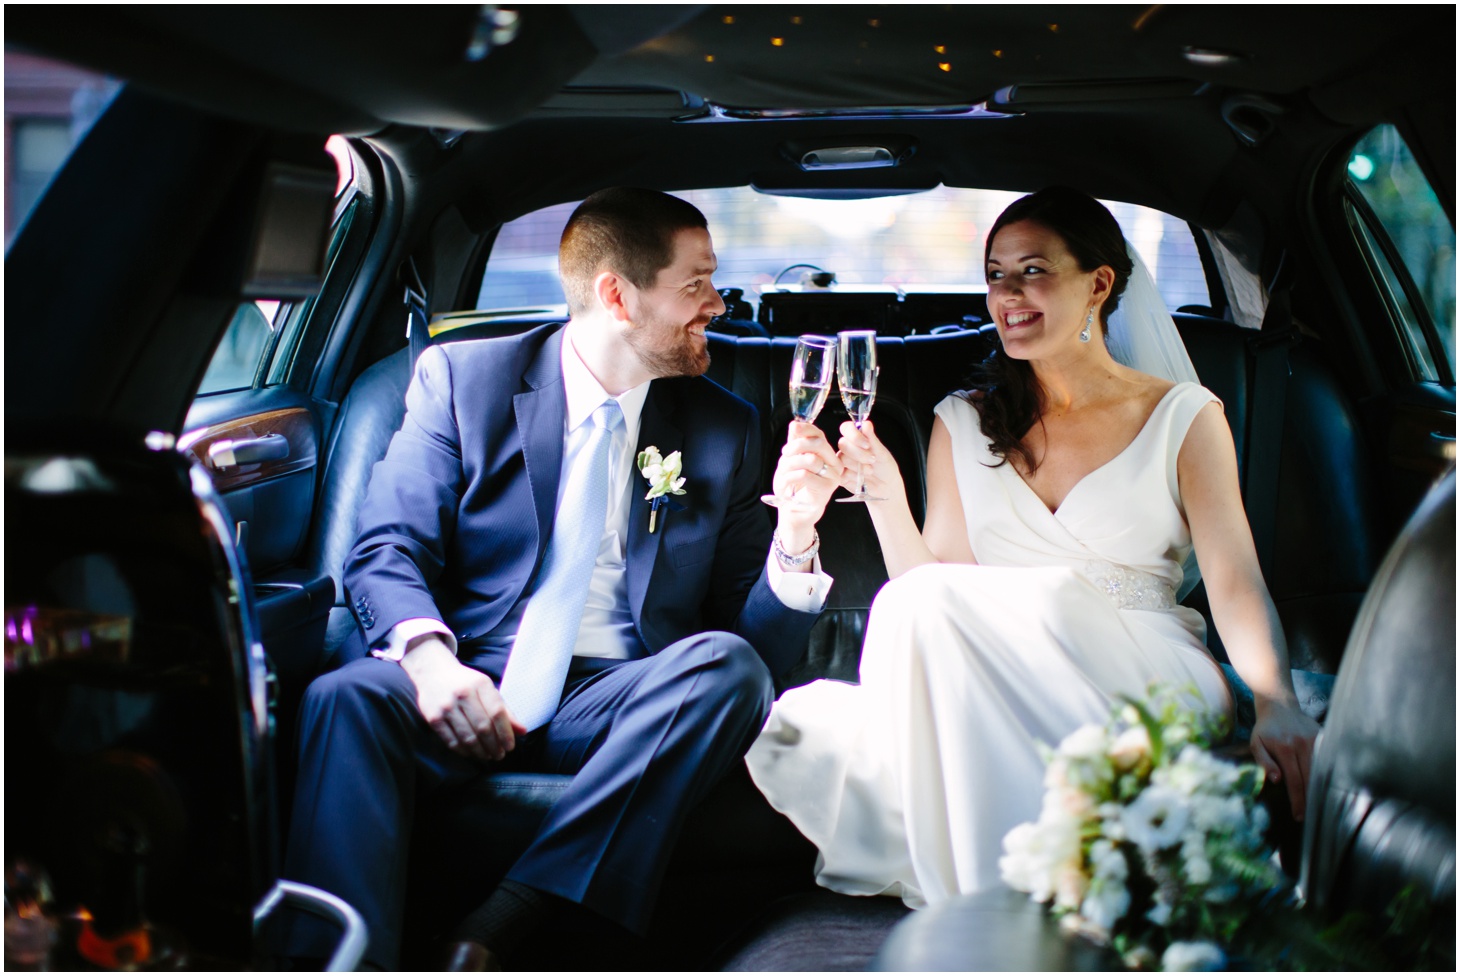 Mikey & Megan, Downtown DC Wedding at National Museum of Women in the Arts by Sarah Bradshaw Photography_0033.jpg